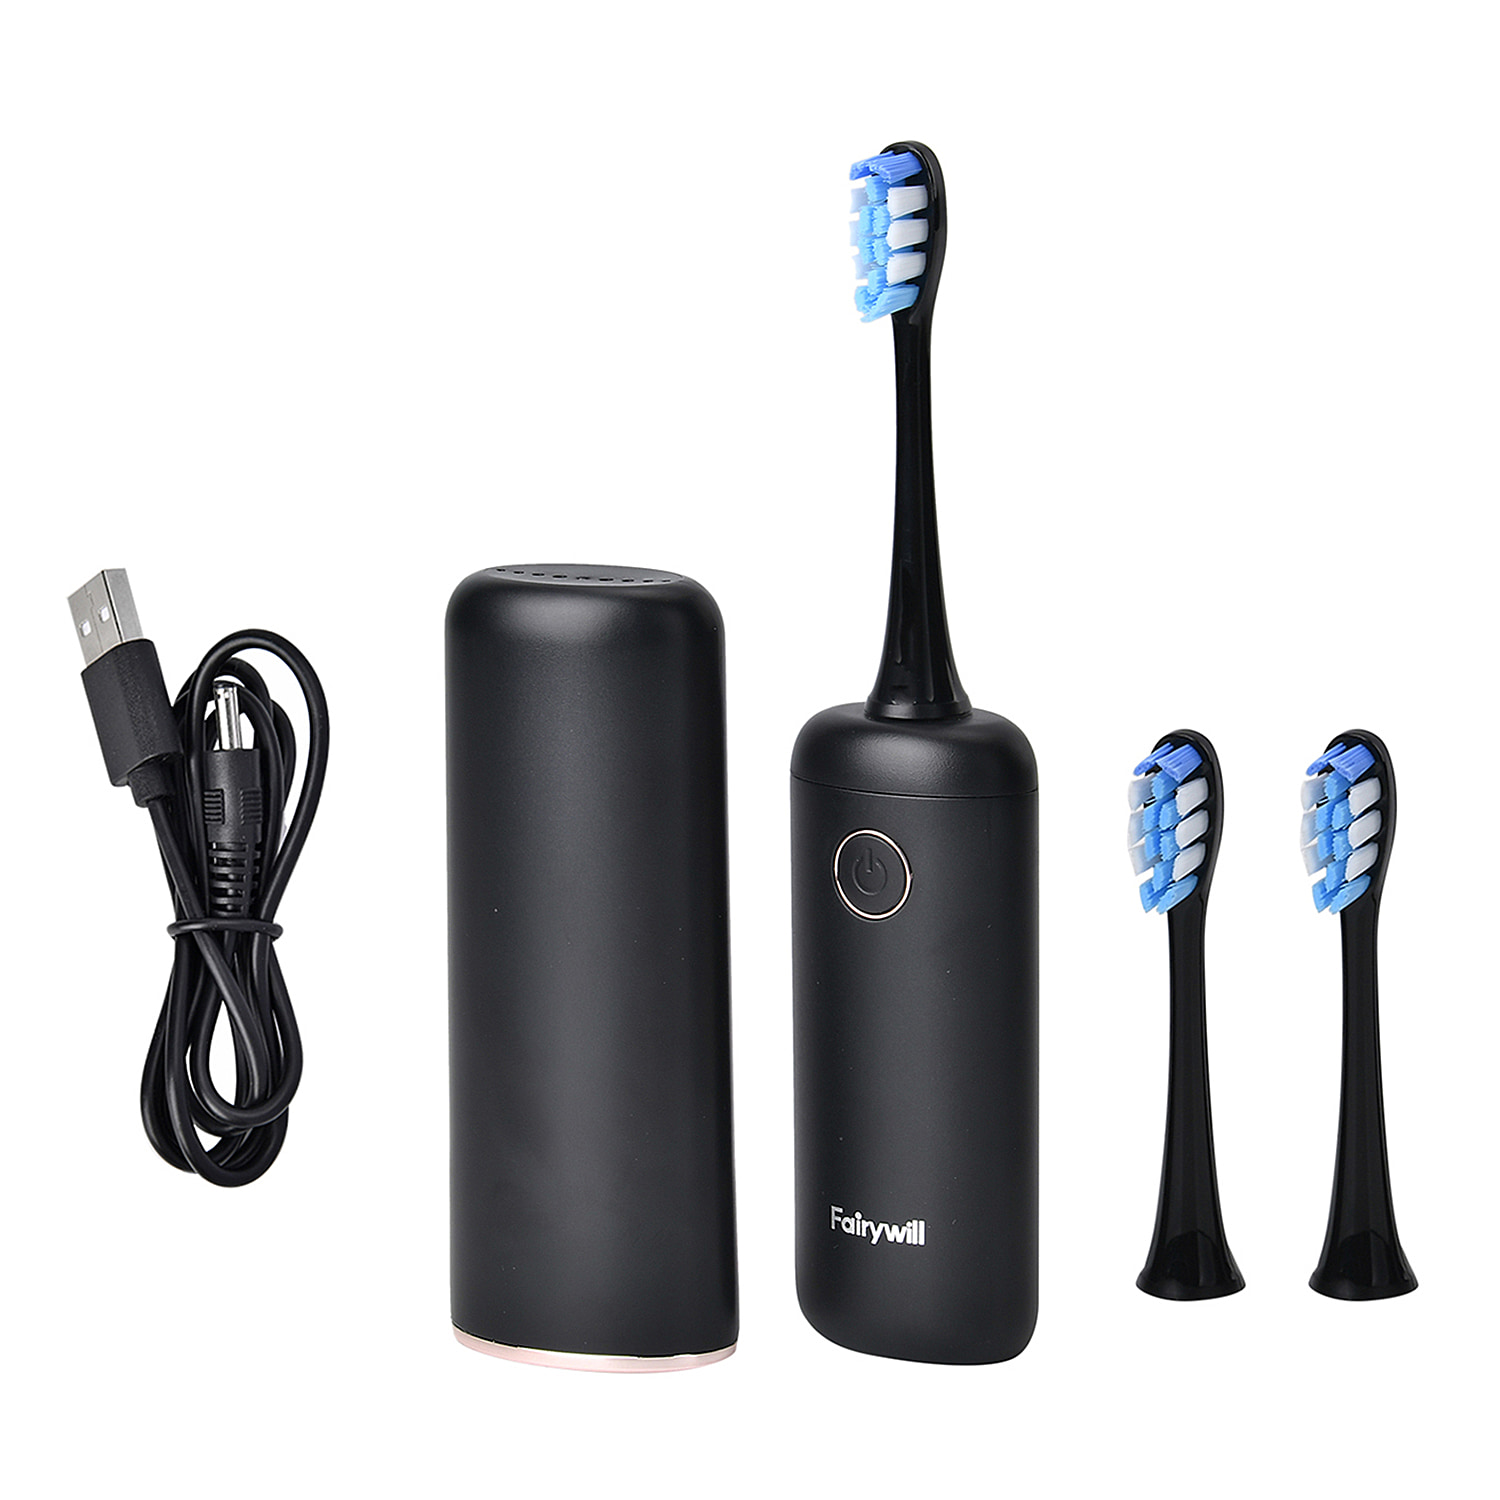 Fairywill-T9-Electric-toothbrush-Black